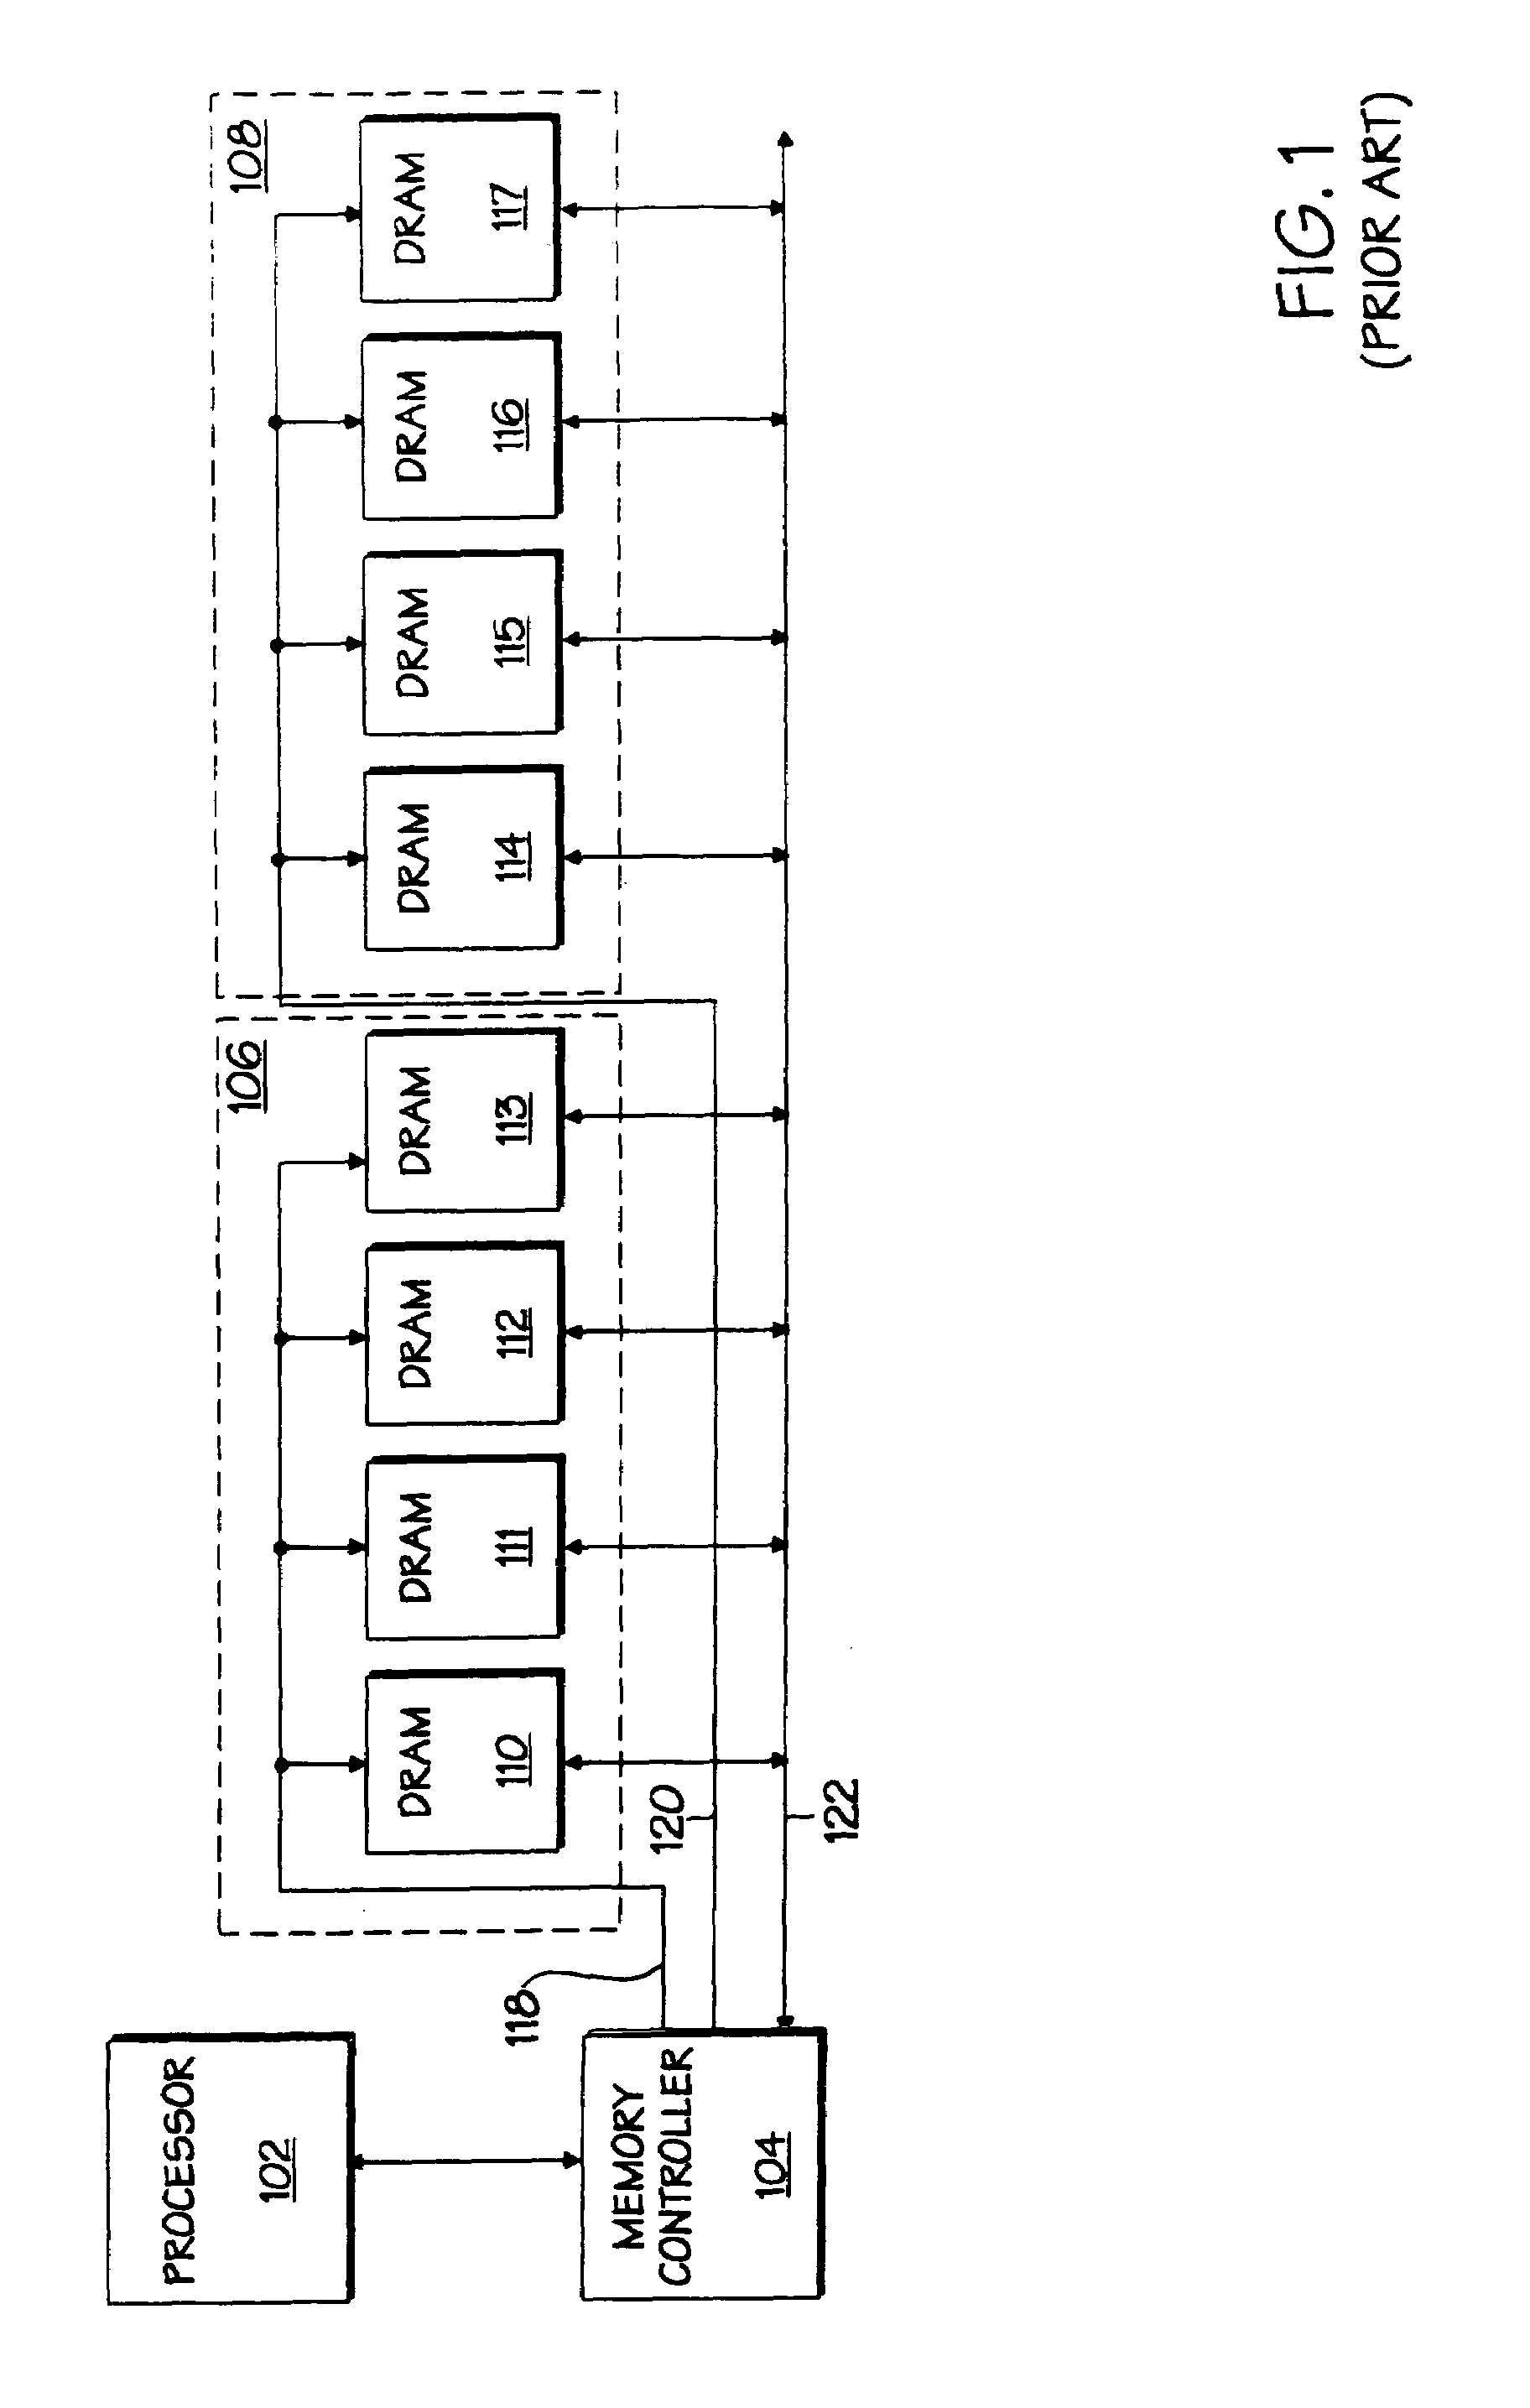 Memory module having a memory module controller controlling memory transactions for a plurality of memory devices